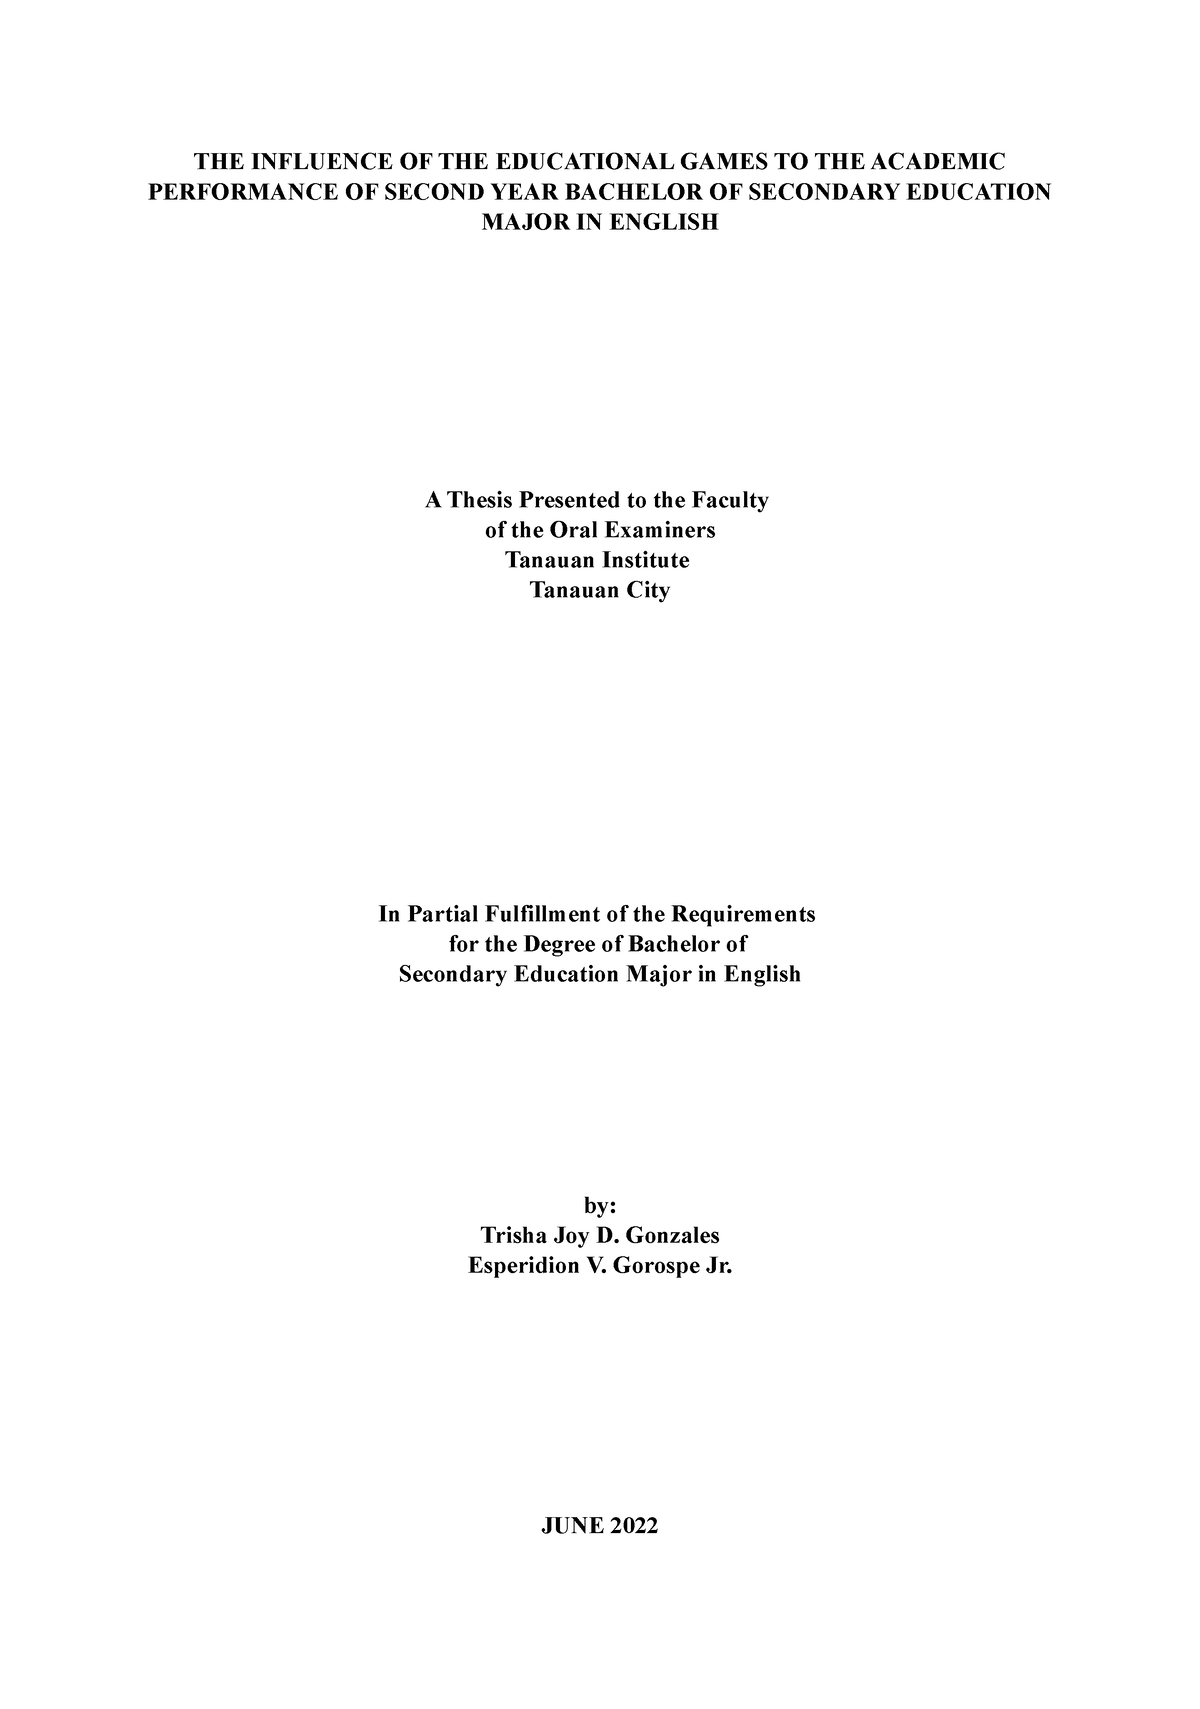 phd thesis on educational game